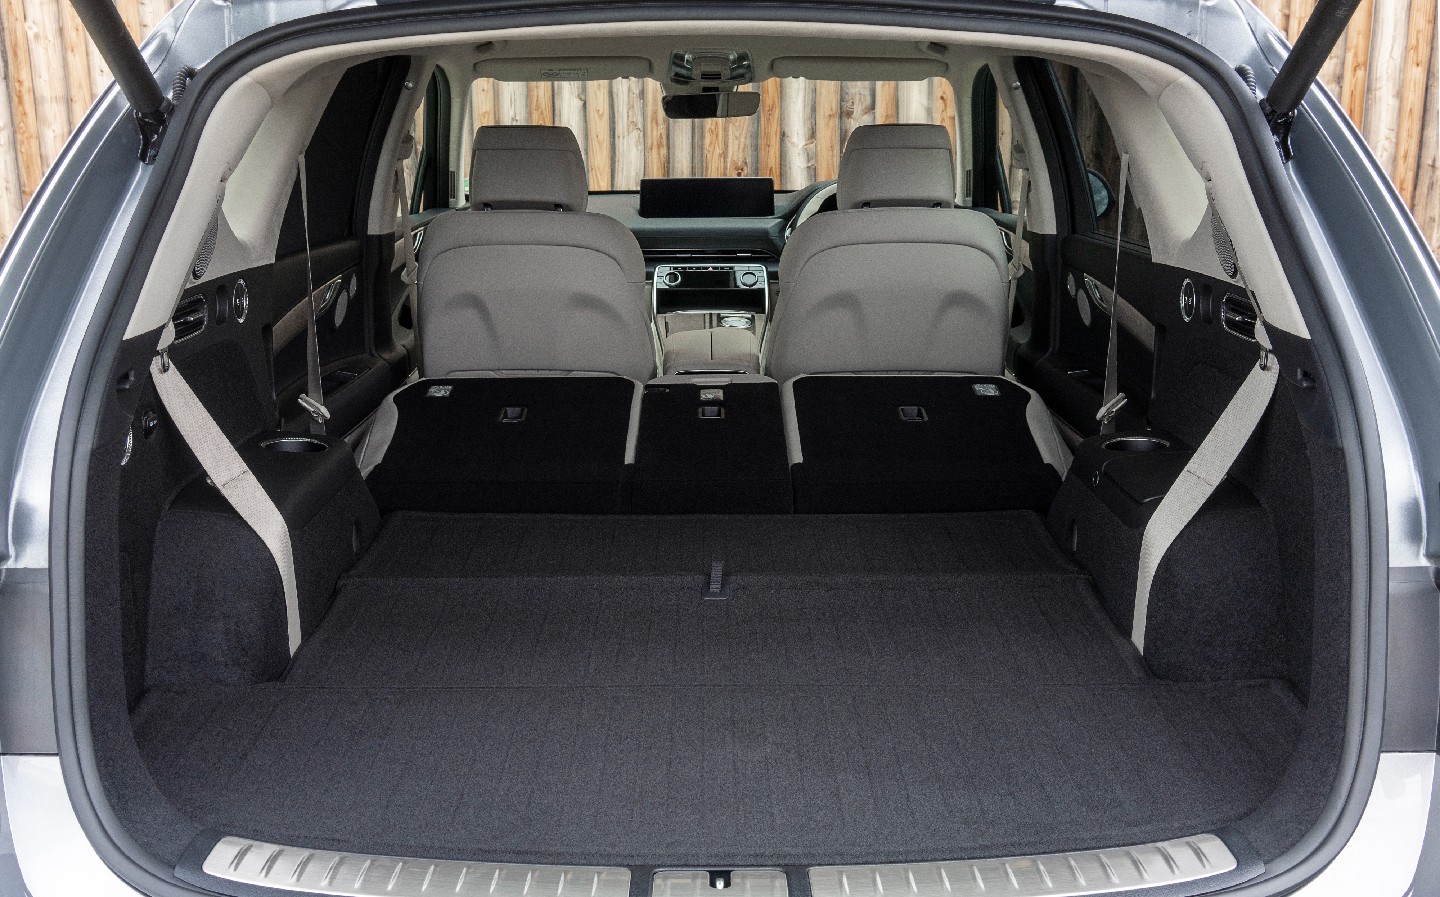 Boot space - Genesis GV80 2021 review by Will Dron for Sunday Times Driving.co.uk